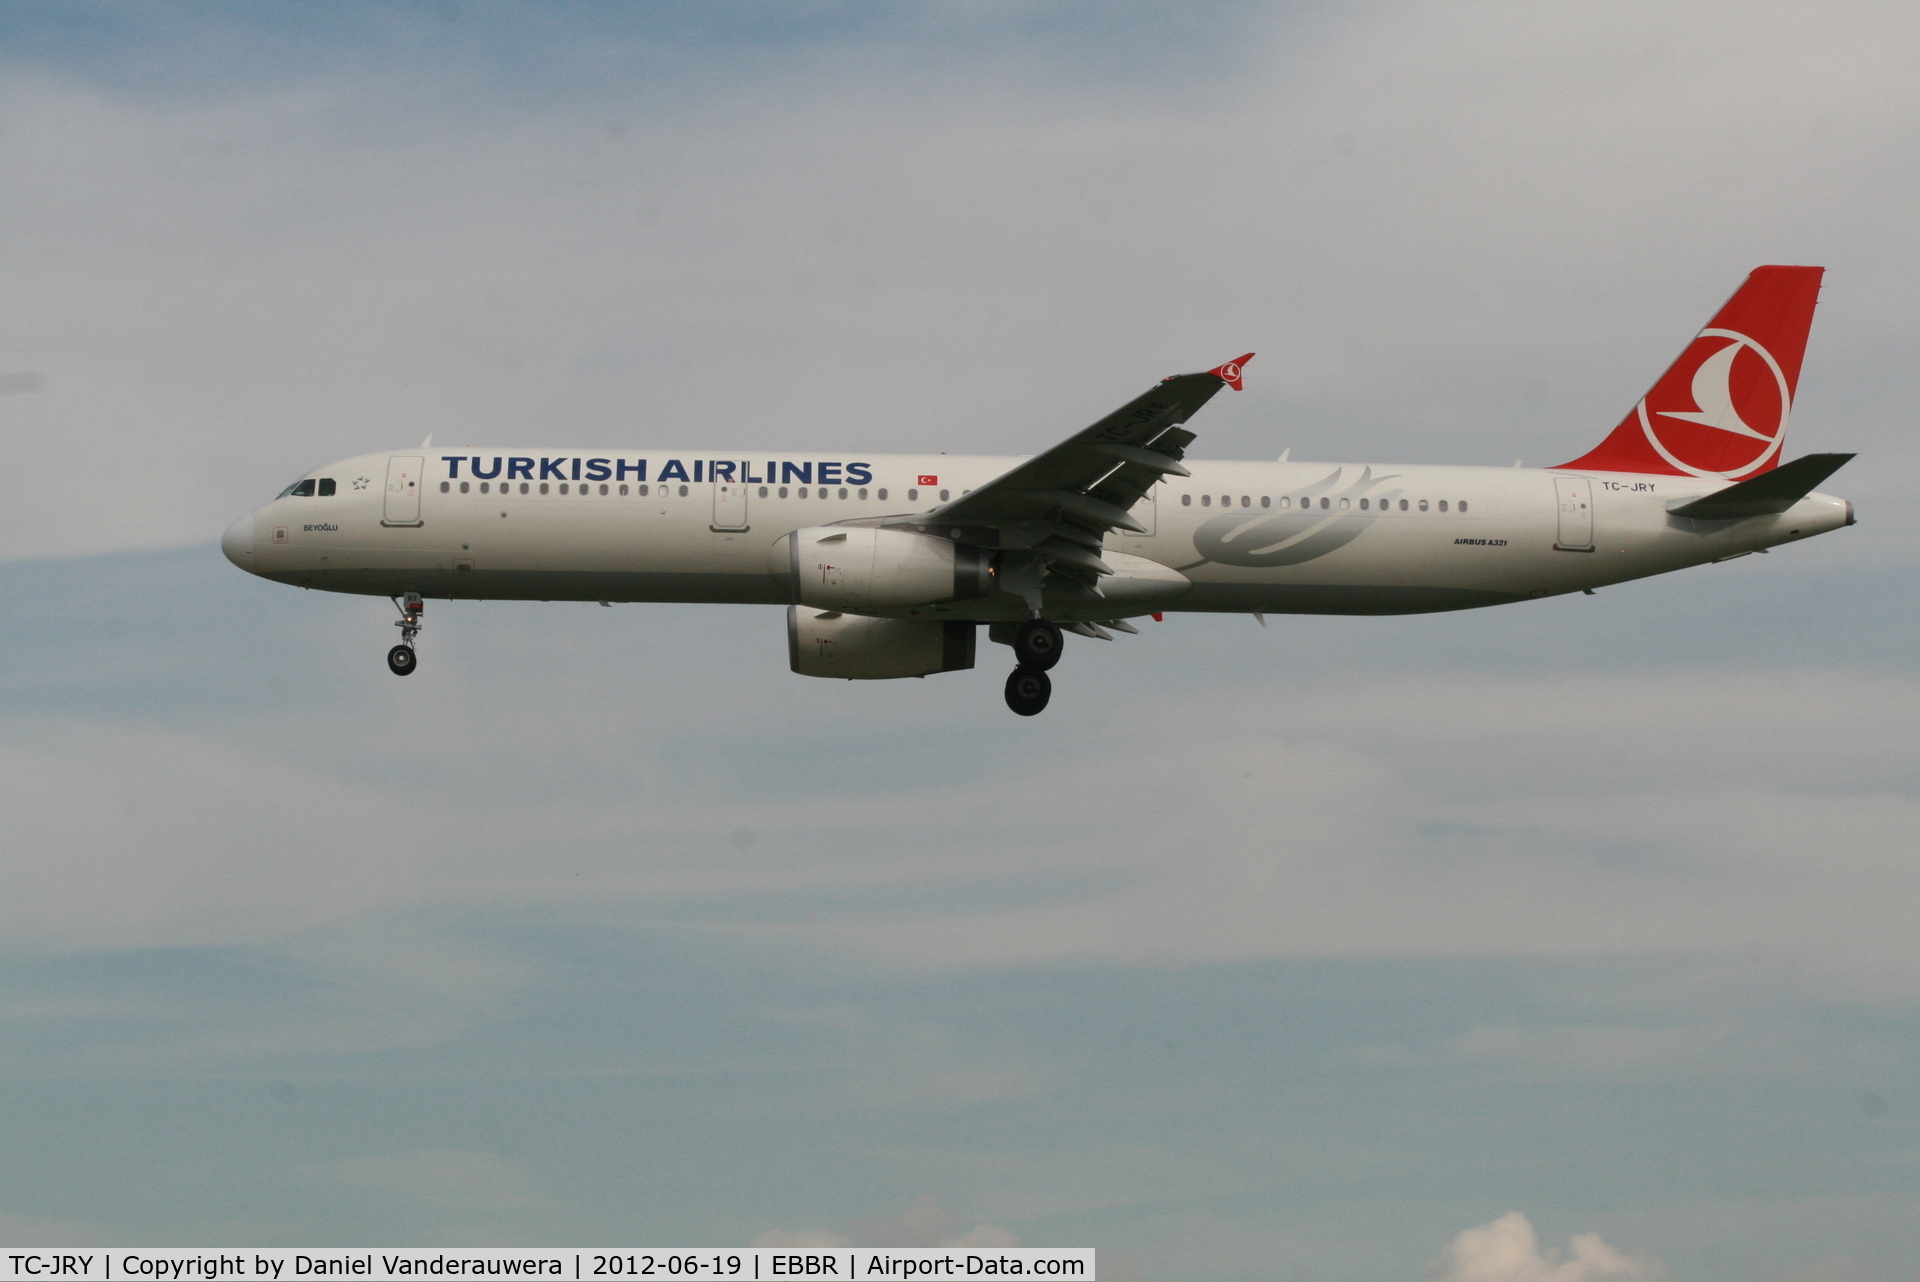 TC-JRY, 2012 Airbus A321-231 C/N 5083, Arrival of flight TK1937 to RWY 25L